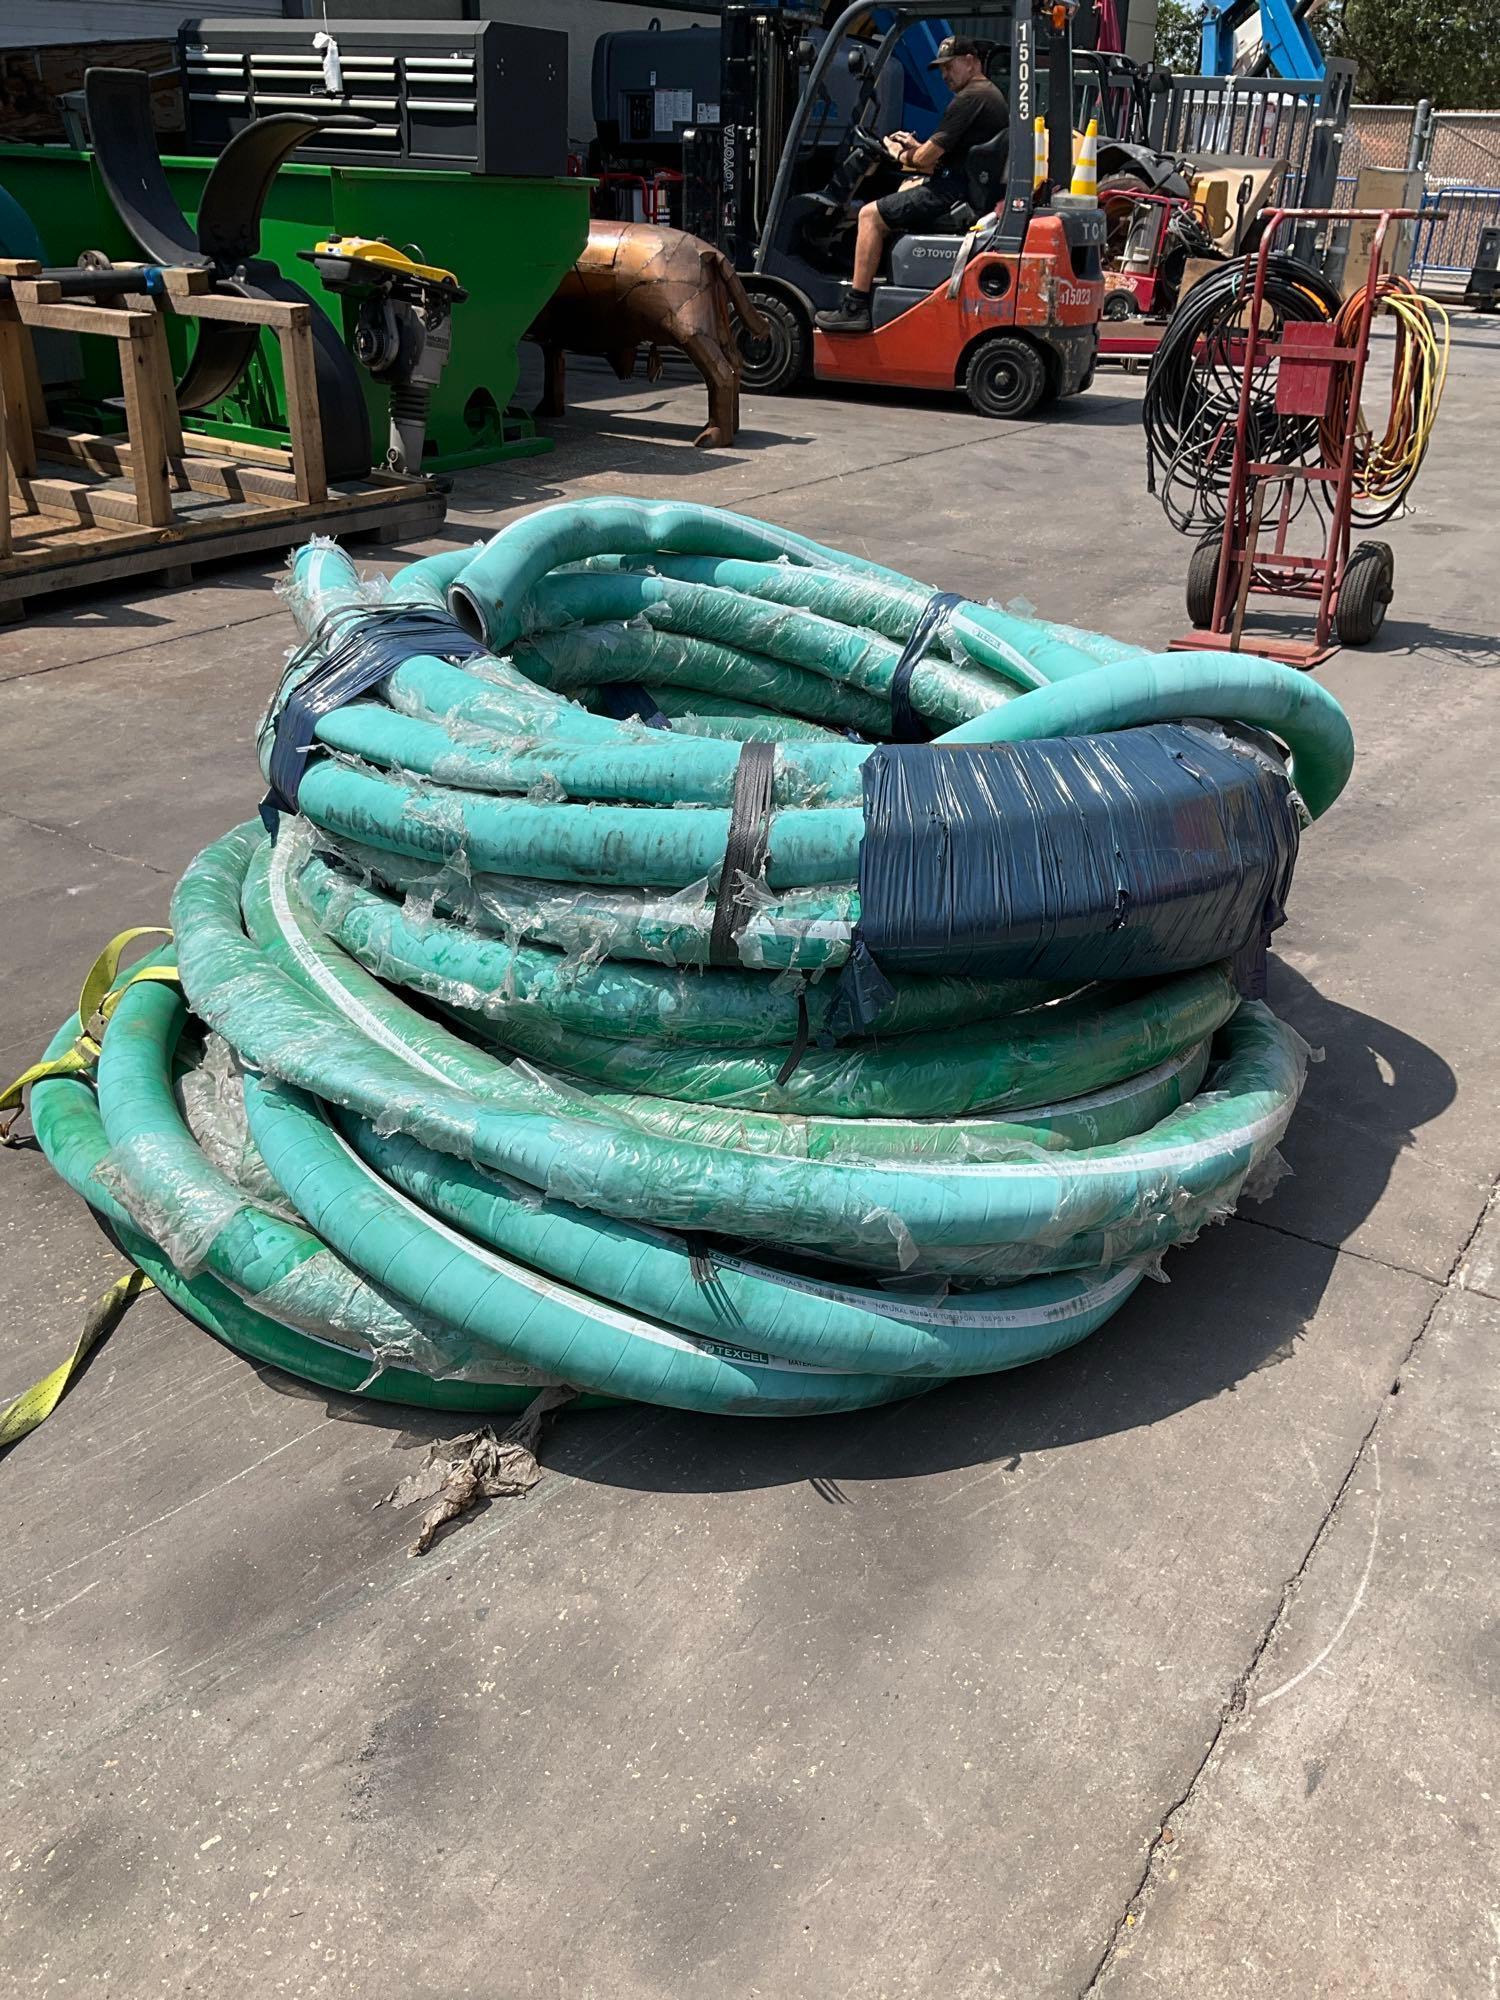 PALLET OF ASSORTED...TEXCEL...MATERIAL TRANSFER HOSE